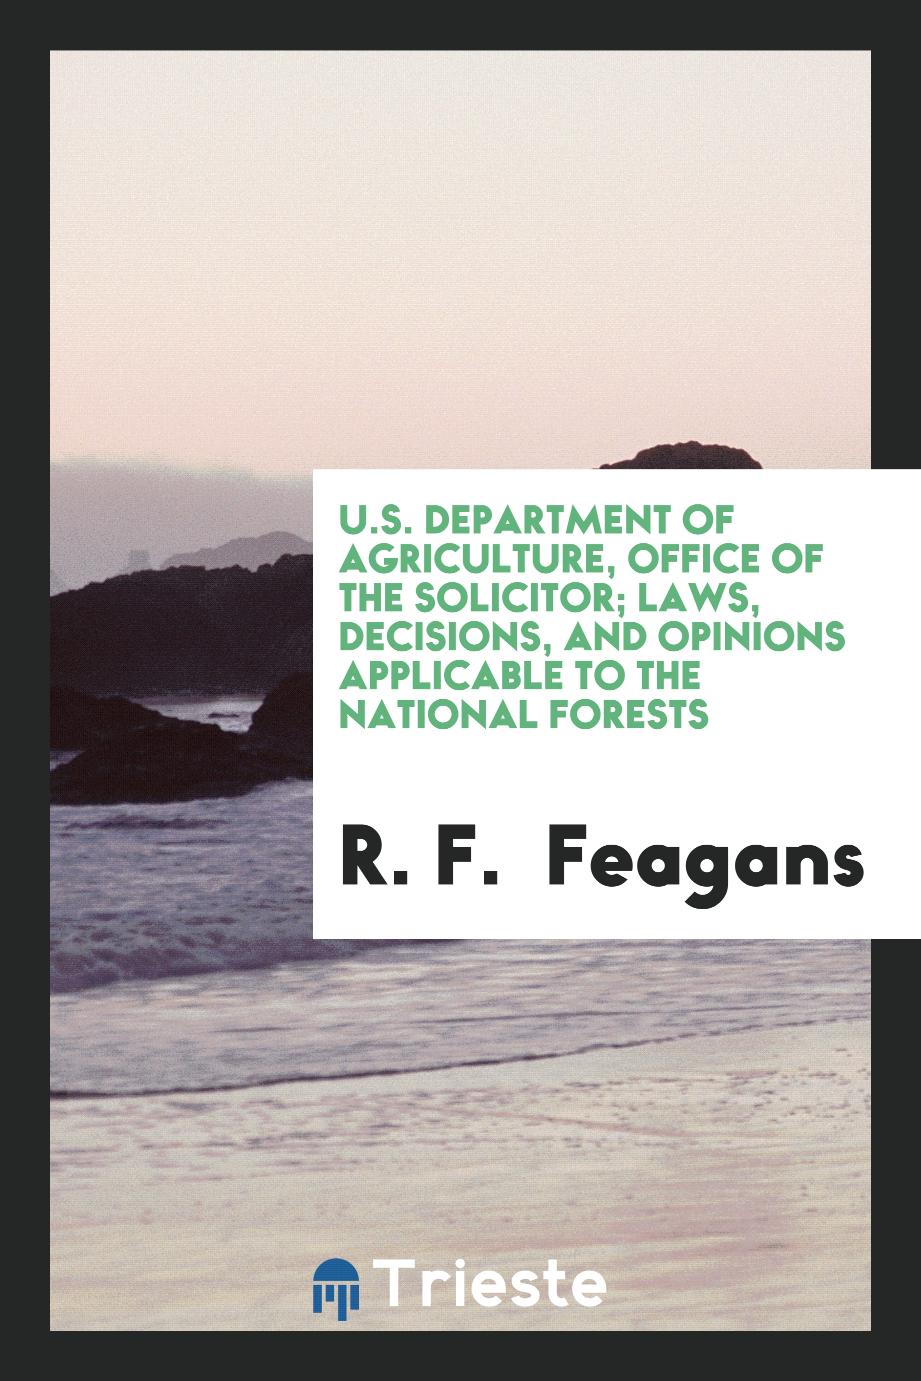 U.S. Department of Agriculture, Office of the Solicitor; Laws, Decisions, and Opinions Applicable to the National Forests